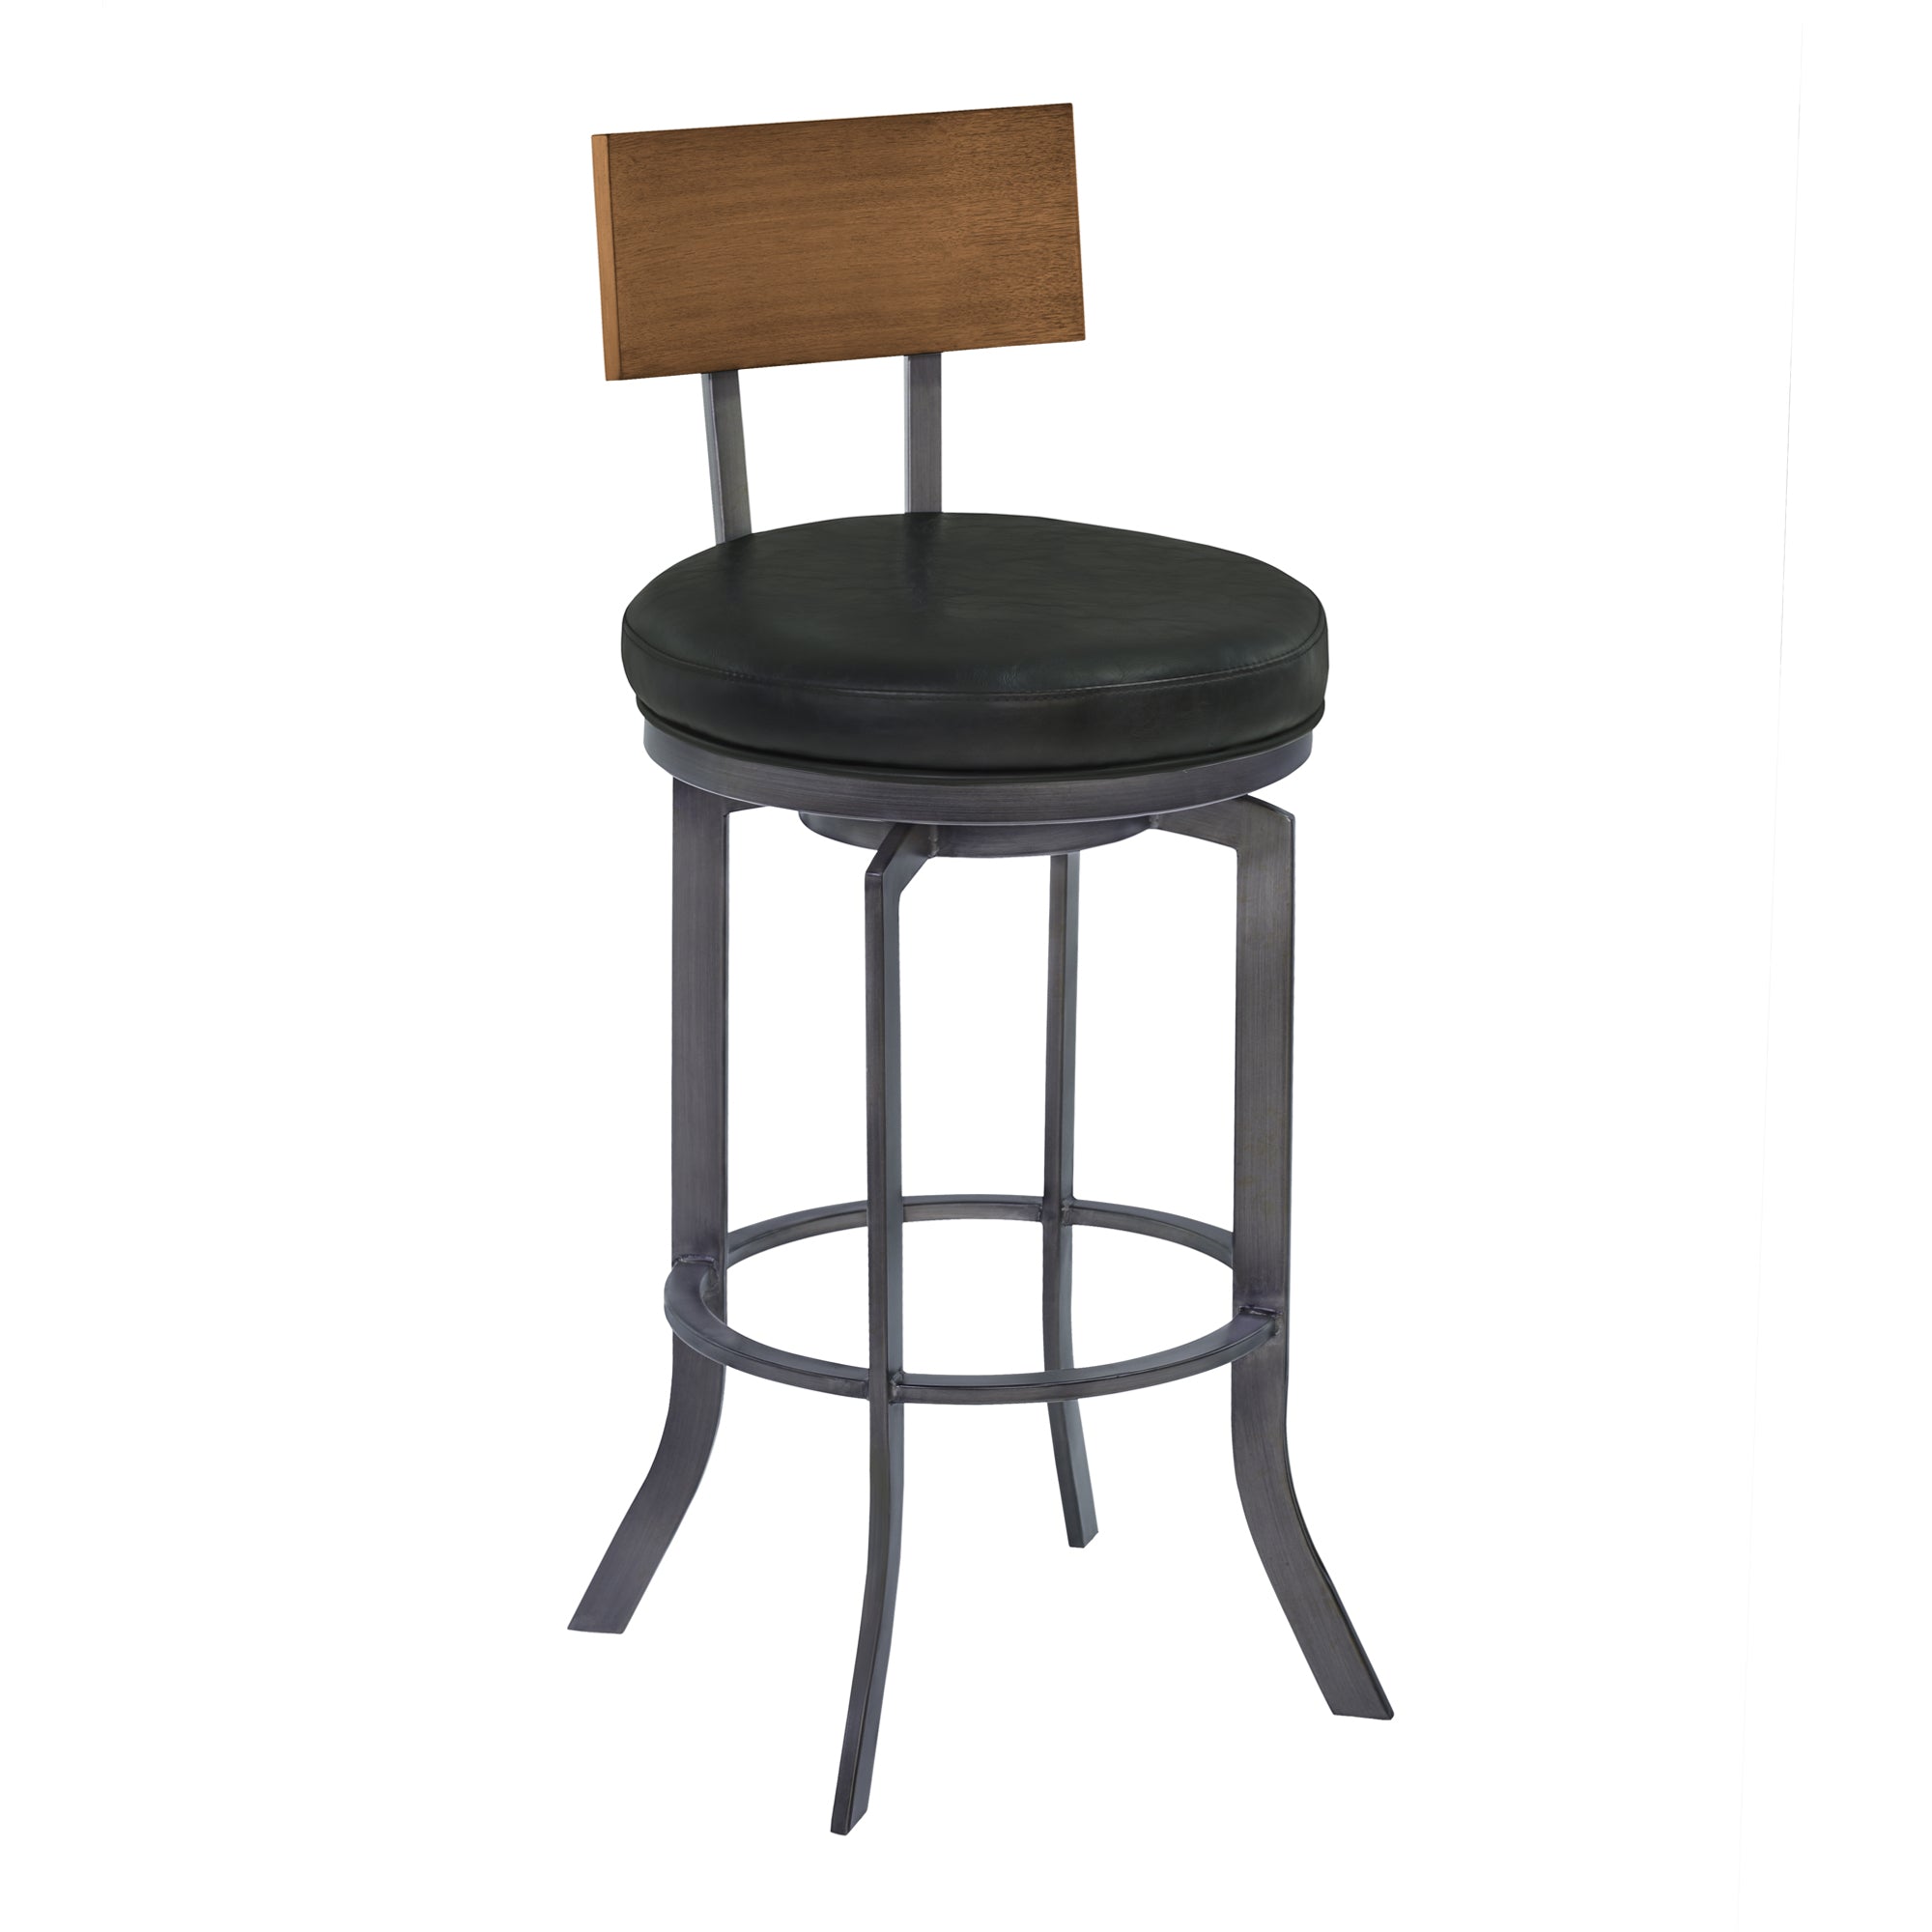 Armen Living Lcojbavb30 Ojai 30" Bar Height Metal Swivel Barstool In Vintage Black Faux Leather With Mineral Finish And Walnut Wood Back